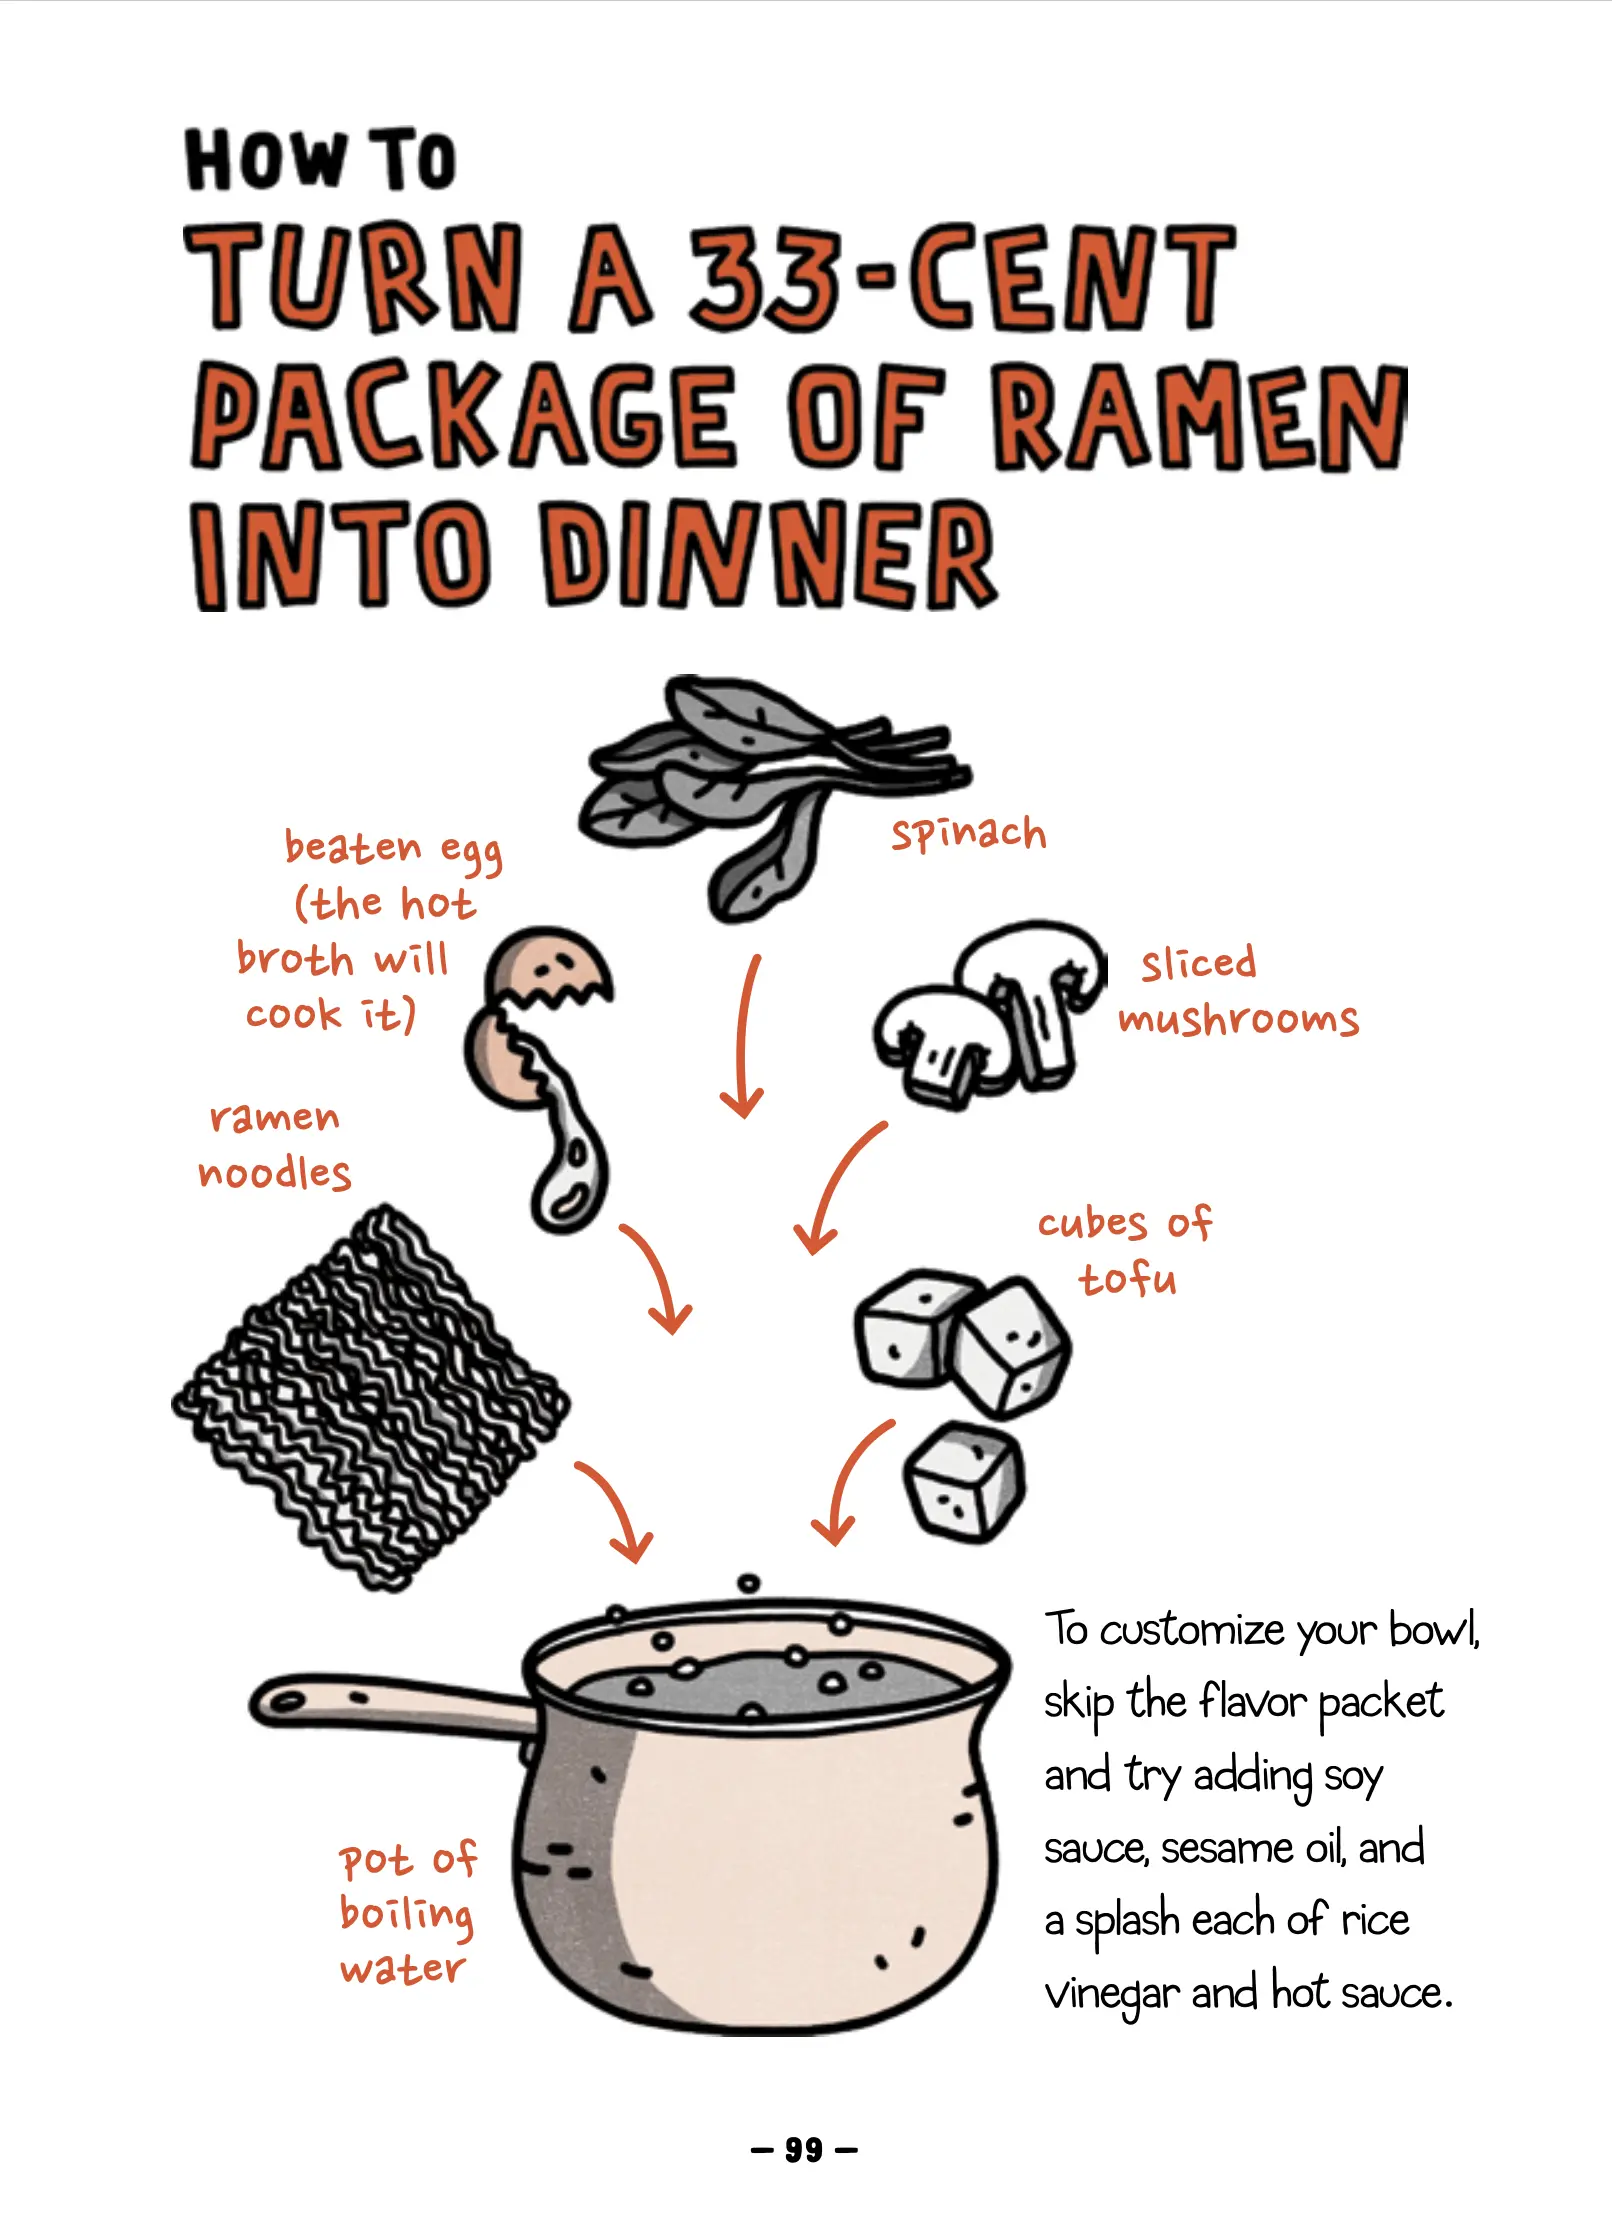 Title: How to turn a 33-cent package of ramen into dinner. Image with labels of a pot of boiling water, sliced mushrooms, cubes of tofu, beaten egg (the hot broth will cook it), and ramen noodles. Caption: To customize your bowl, skip the flavor packet and try adding soy sauce, sesame oil and a splash each of rice vinegar and hot sauce